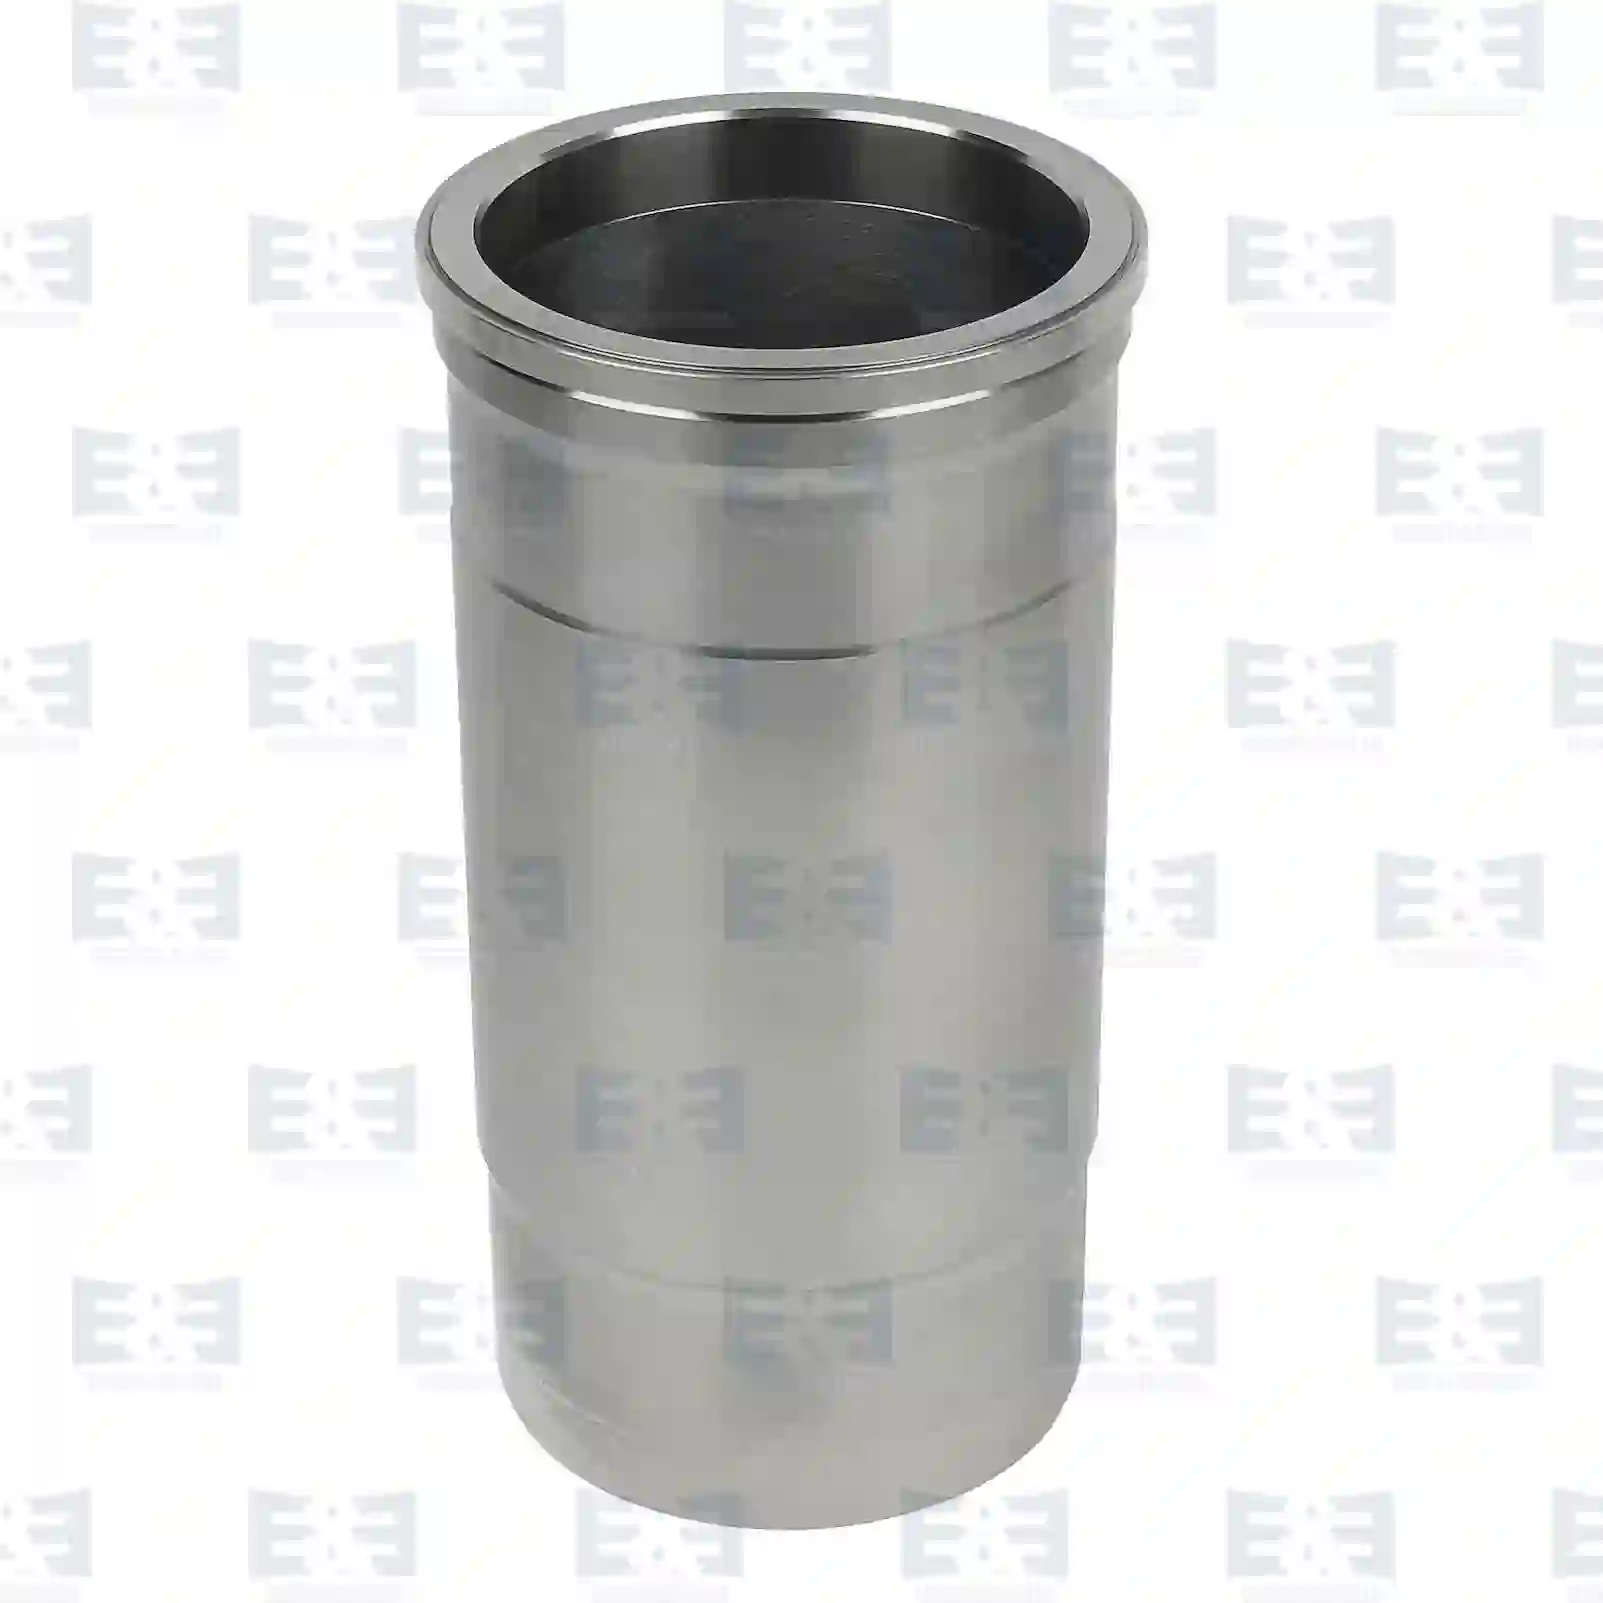 Cylinder liner, without seal rings, 2E2200426, 1445819000, 1114035, 235828, 295053, 348889, 363301, 79245643 ||  2E2200426 E&E Truck Spare Parts | Truck Spare Parts, Auotomotive Spare Parts Cylinder liner, without seal rings, 2E2200426, 1445819000, 1114035, 235828, 295053, 348889, 363301, 79245643 ||  2E2200426 E&E Truck Spare Parts | Truck Spare Parts, Auotomotive Spare Parts